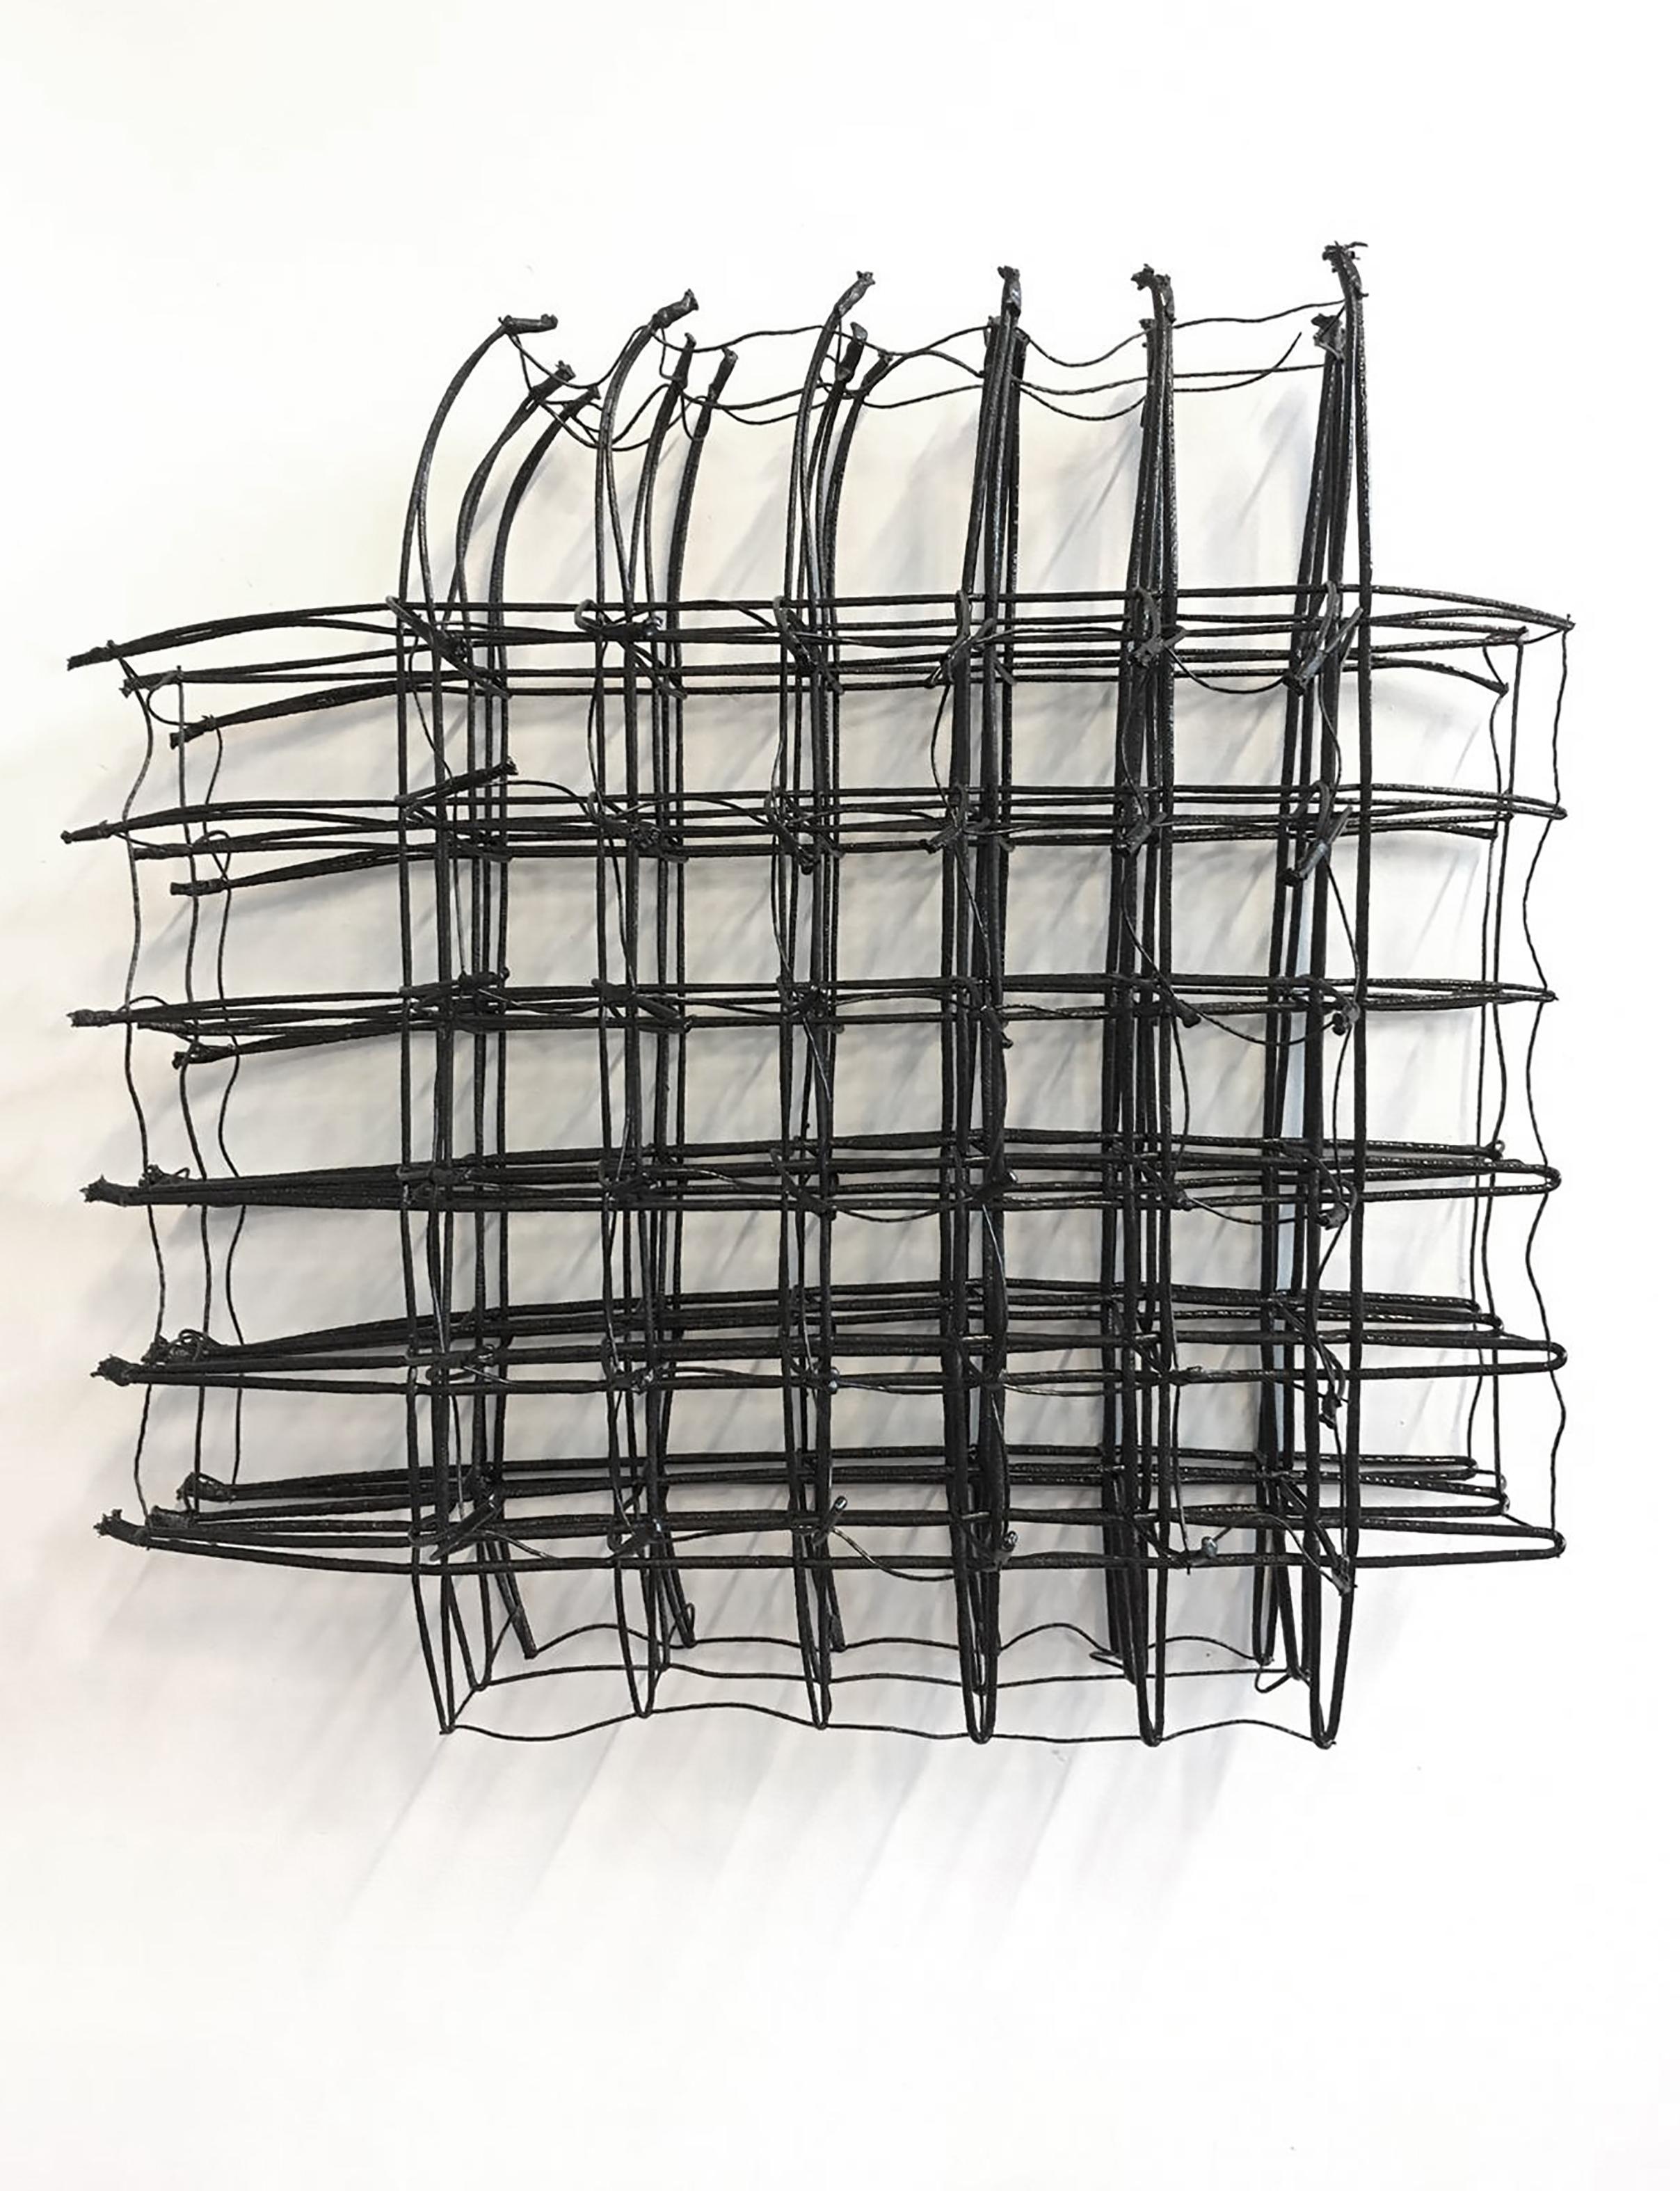 Tar black wall sculpture by Fransje Gimbrere
Dimensions: L 80 x W 80 x D 35 cm
Materials: rPET rope, resin

Fransje Gimbrère is a multidisciplinary designer and art director, born and raised in Tilburg, the textile city of The Netherlands.
In